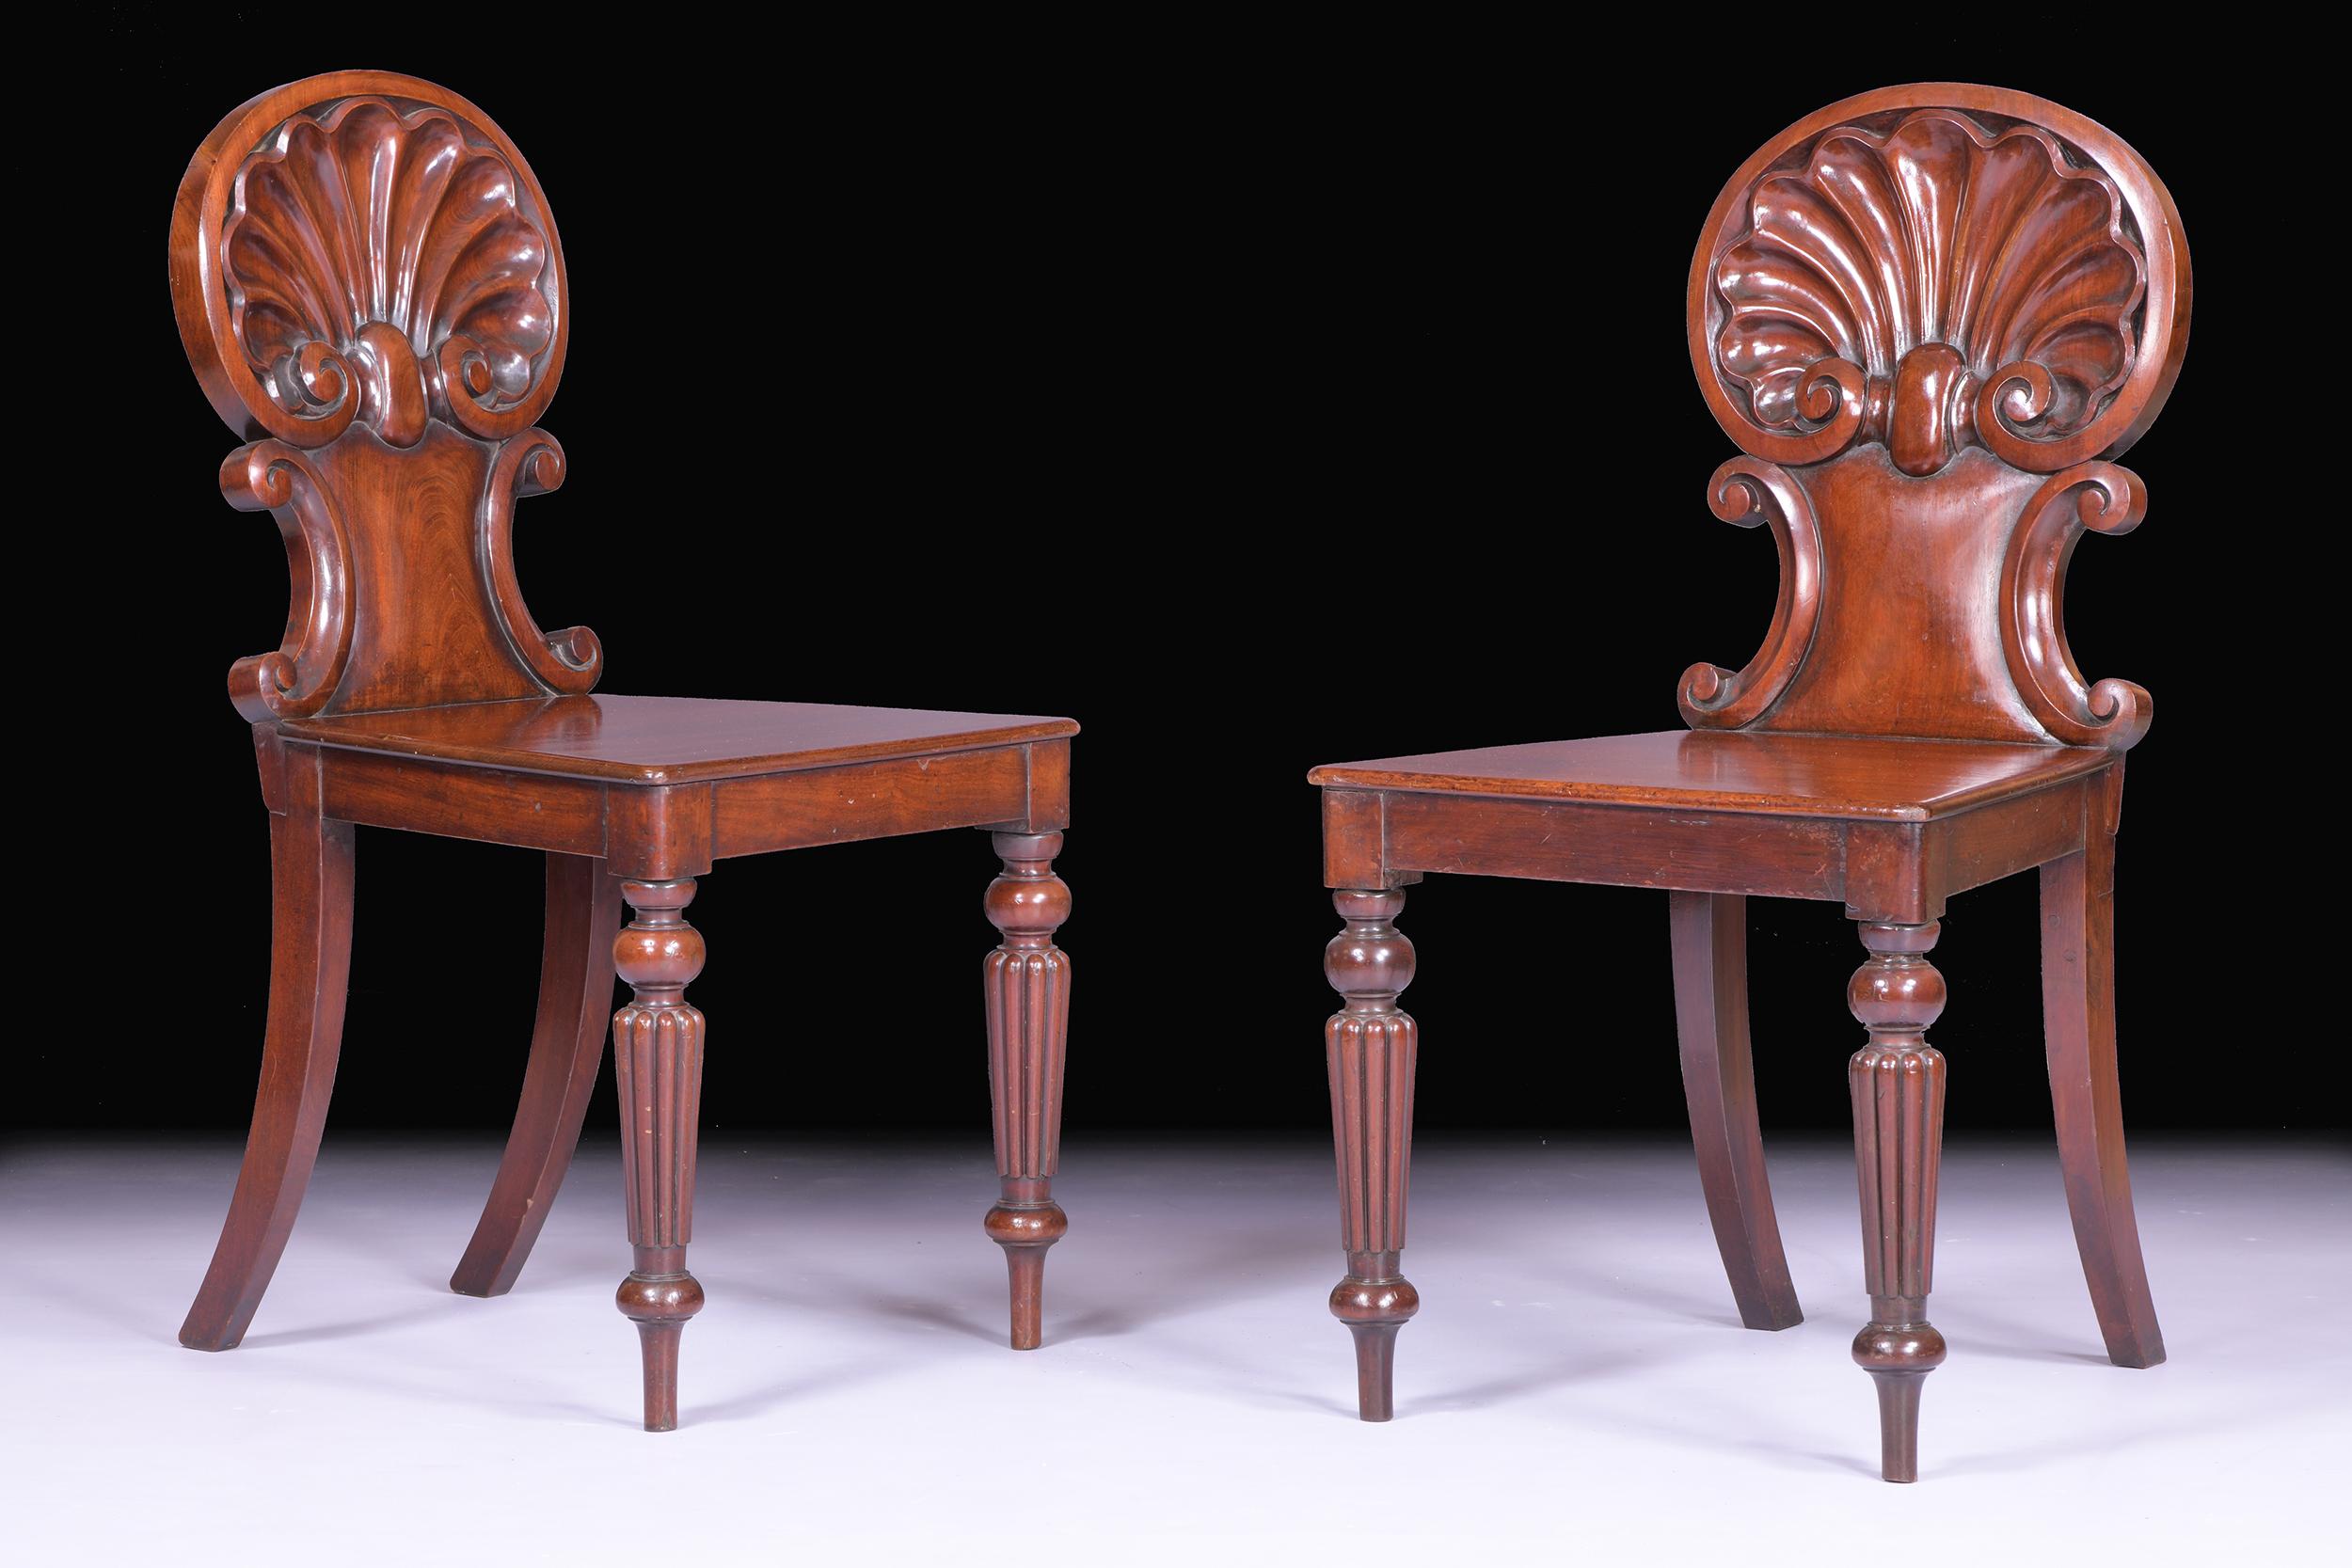 A fine pair of Regency hall / side chairs attributed to Gillows of Lancaster, with carved scallop shell backs, panel seats, raised on reeded column legs.

Circa 1820

English.